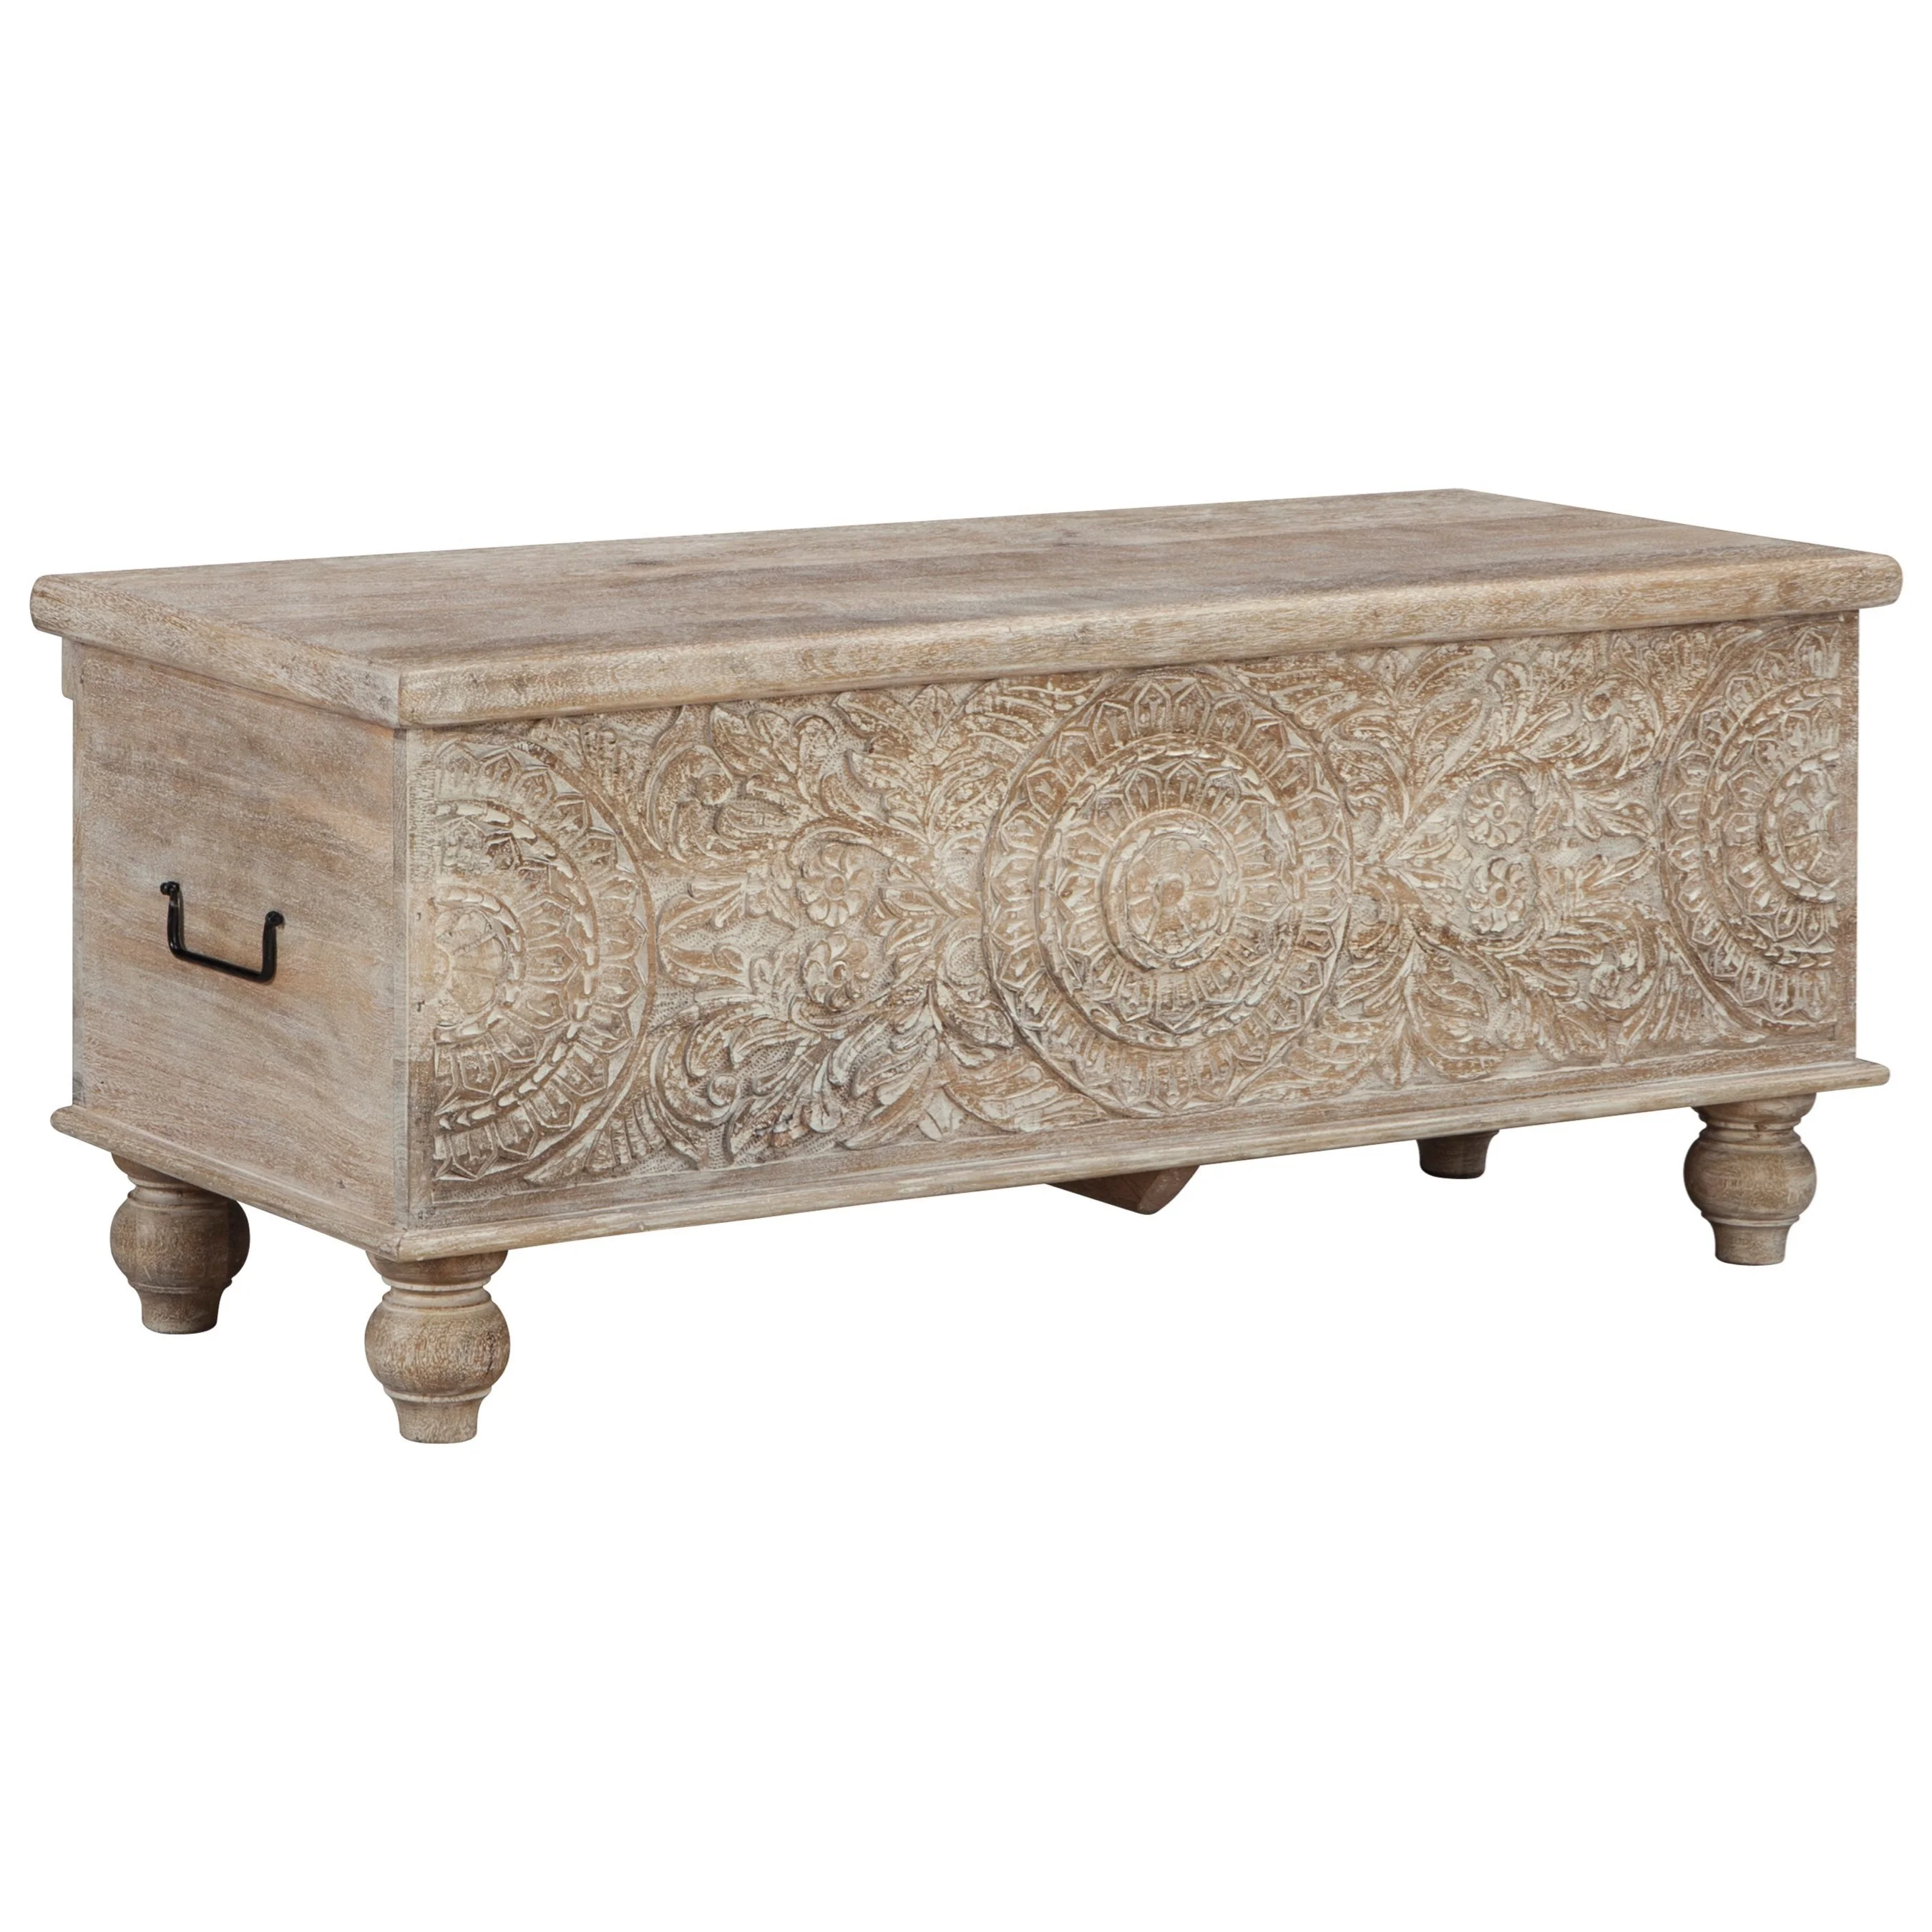 Signature Design by Ashley Fossil Ridge A4000039 Solid Wood Accent Storage  Bench | Furniture Fair - North Carolina | Bench